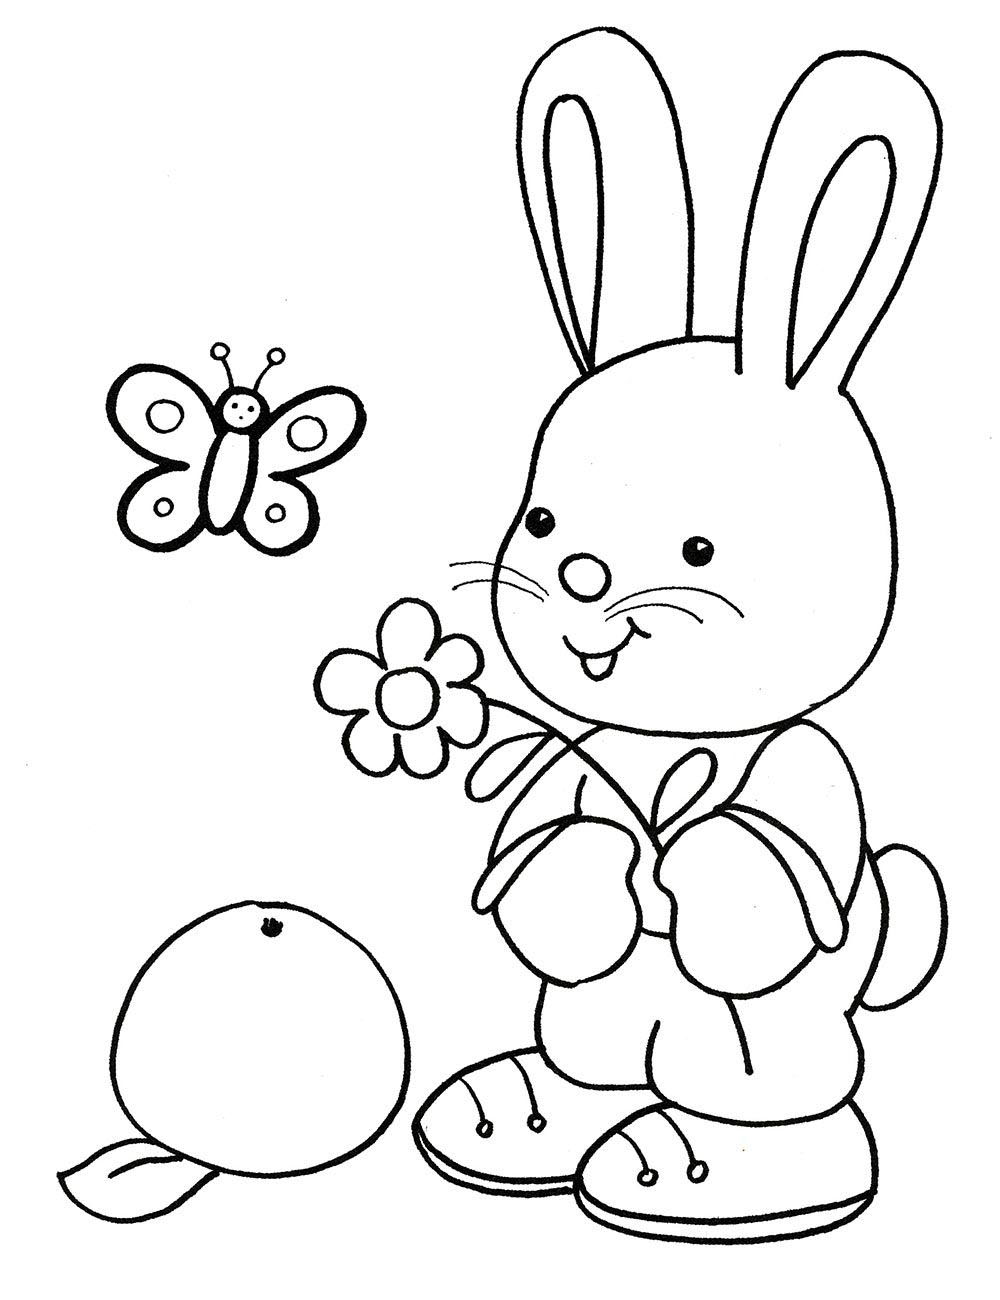 Coloring pages for boys of 3,4 years to download and print ...